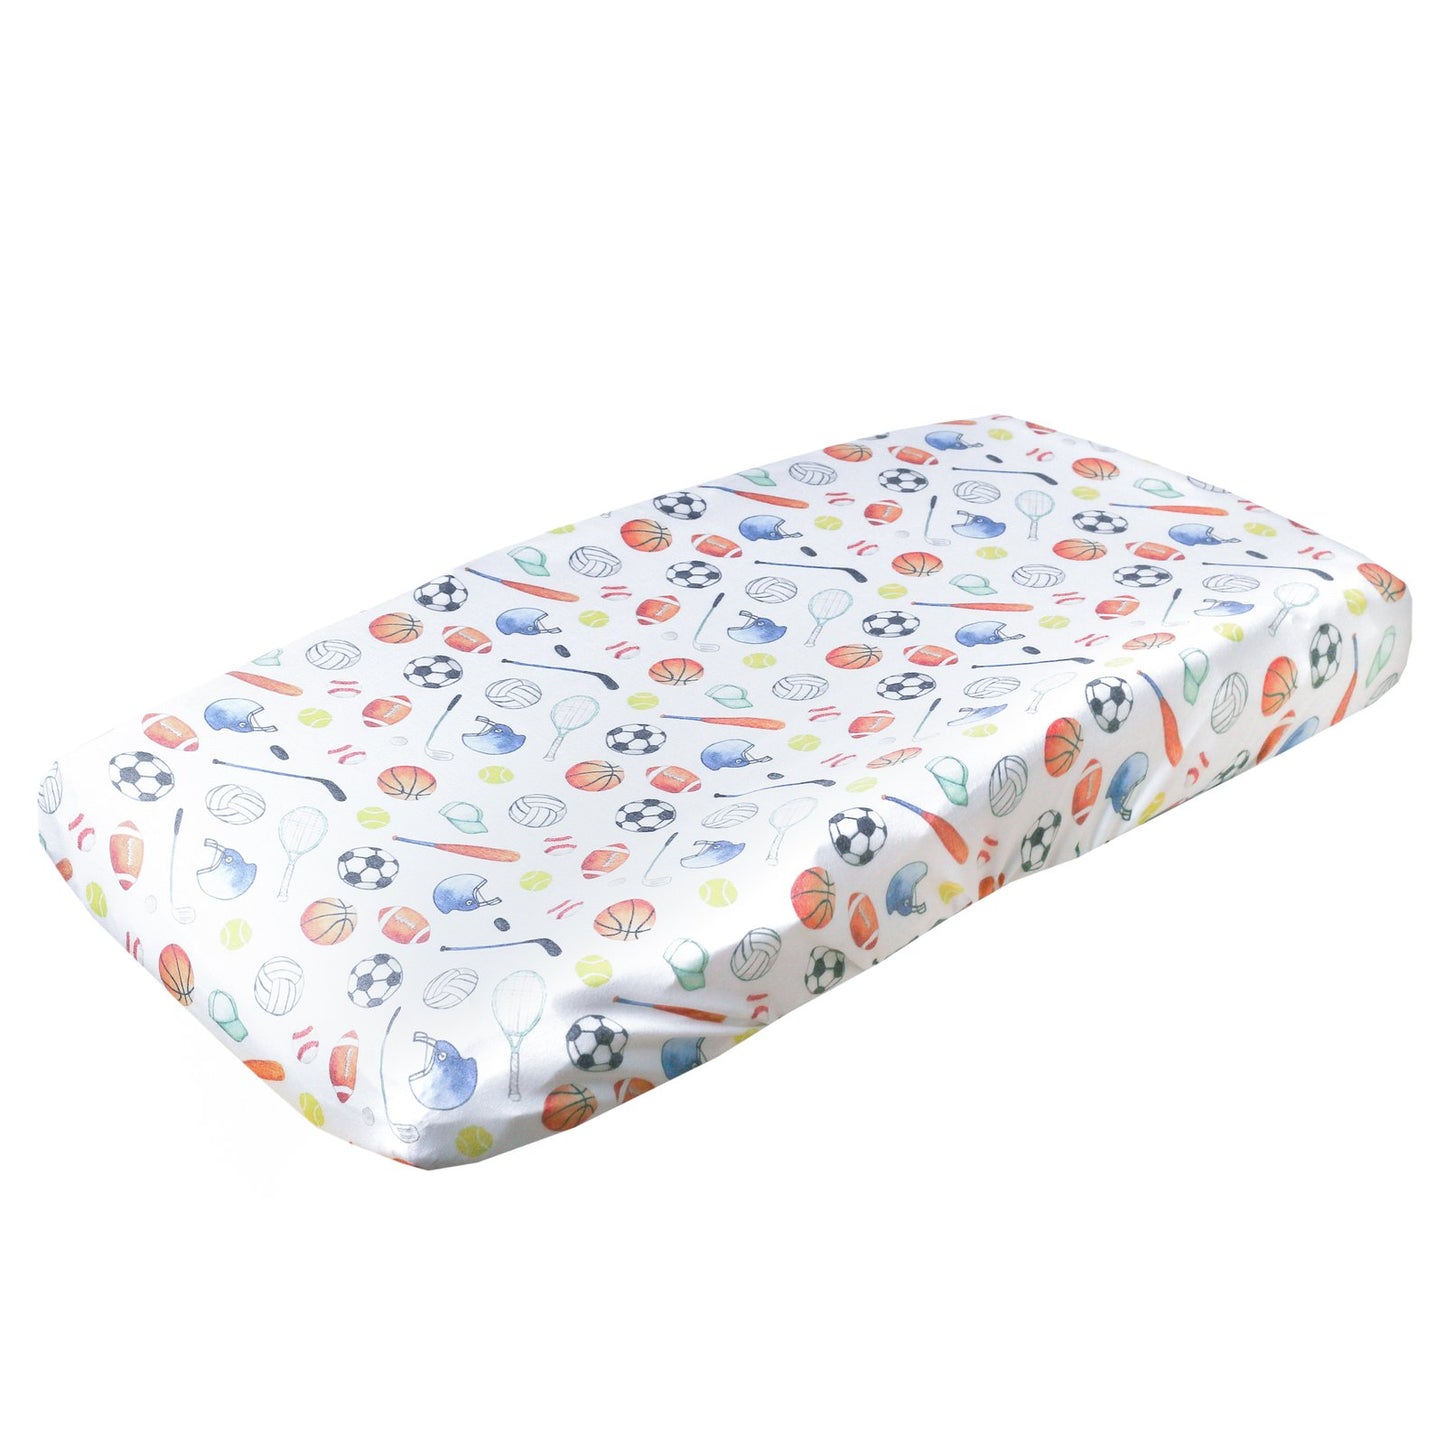 COPPER PEARL CHANGING PAD/VARSITY